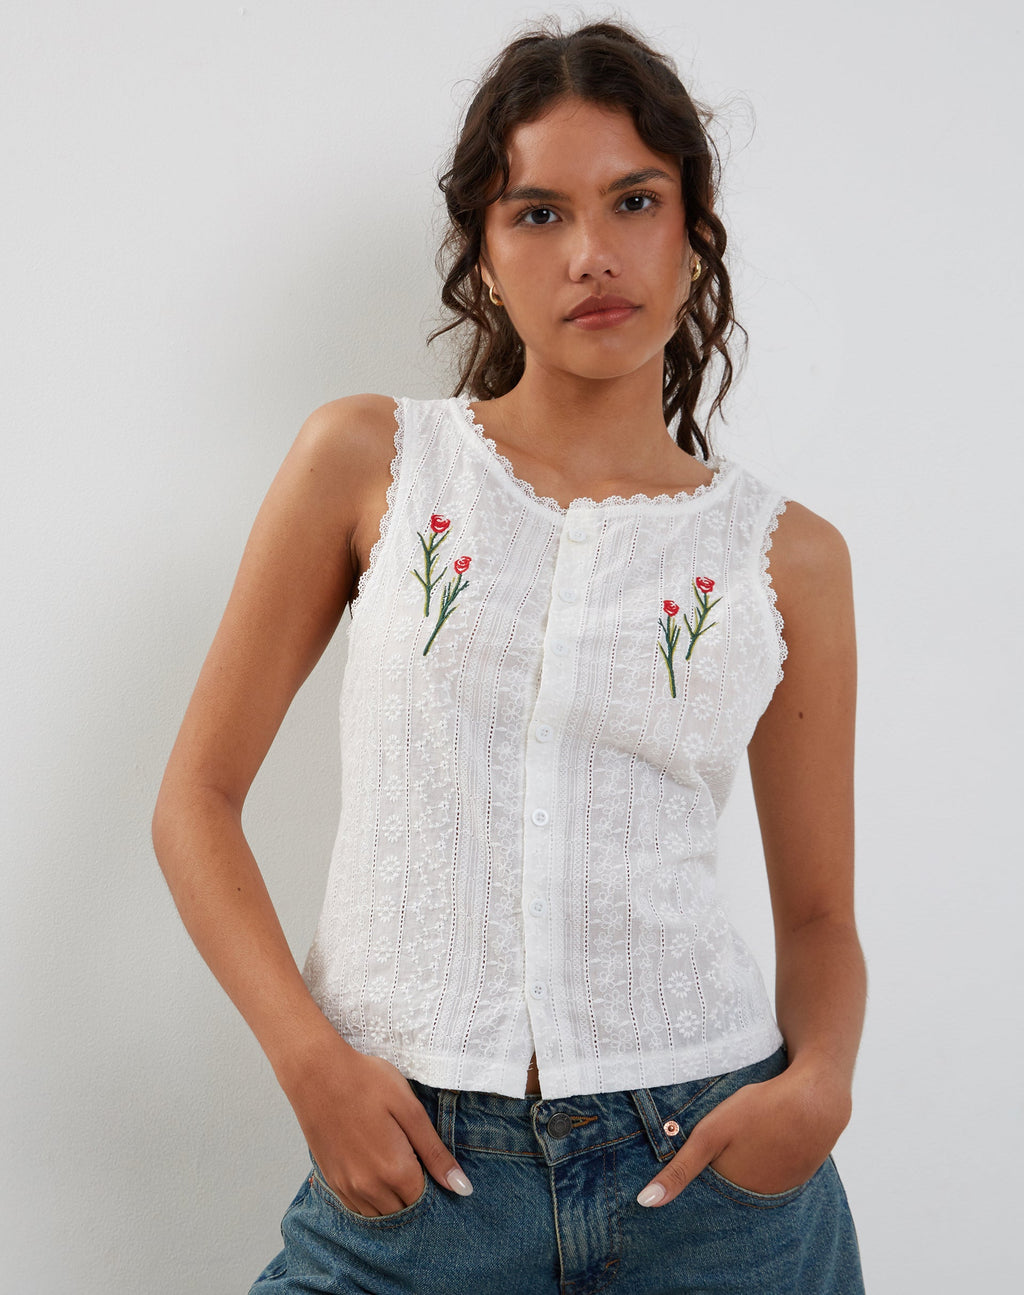 Vezia Broderie Sleeveless Top in White with Rose Embroidery